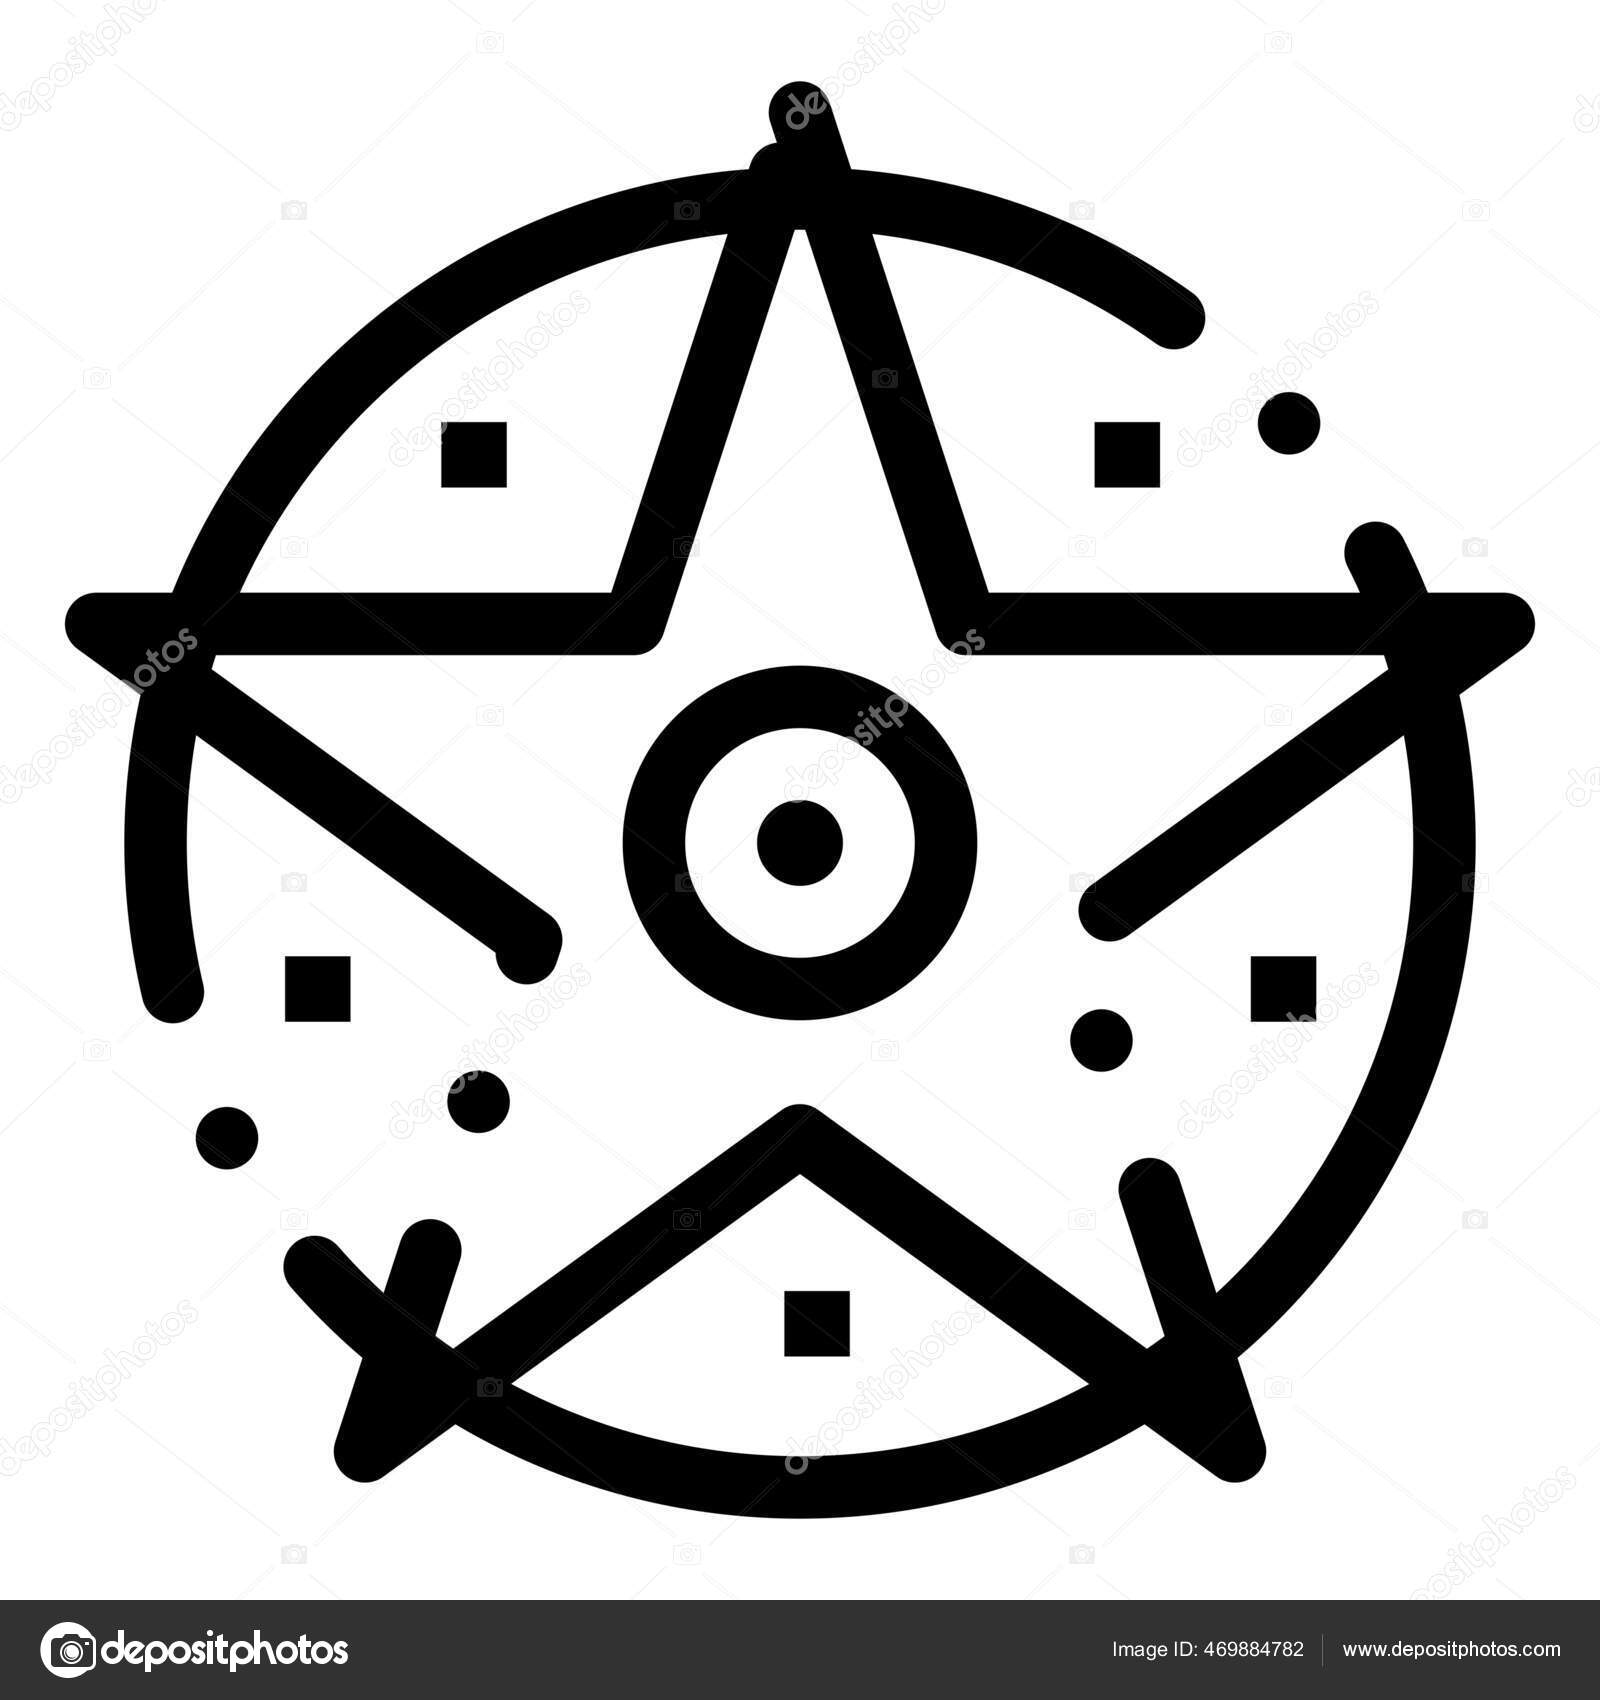 Compass, direction, making, navigation, online icon - Download on Iconfinder